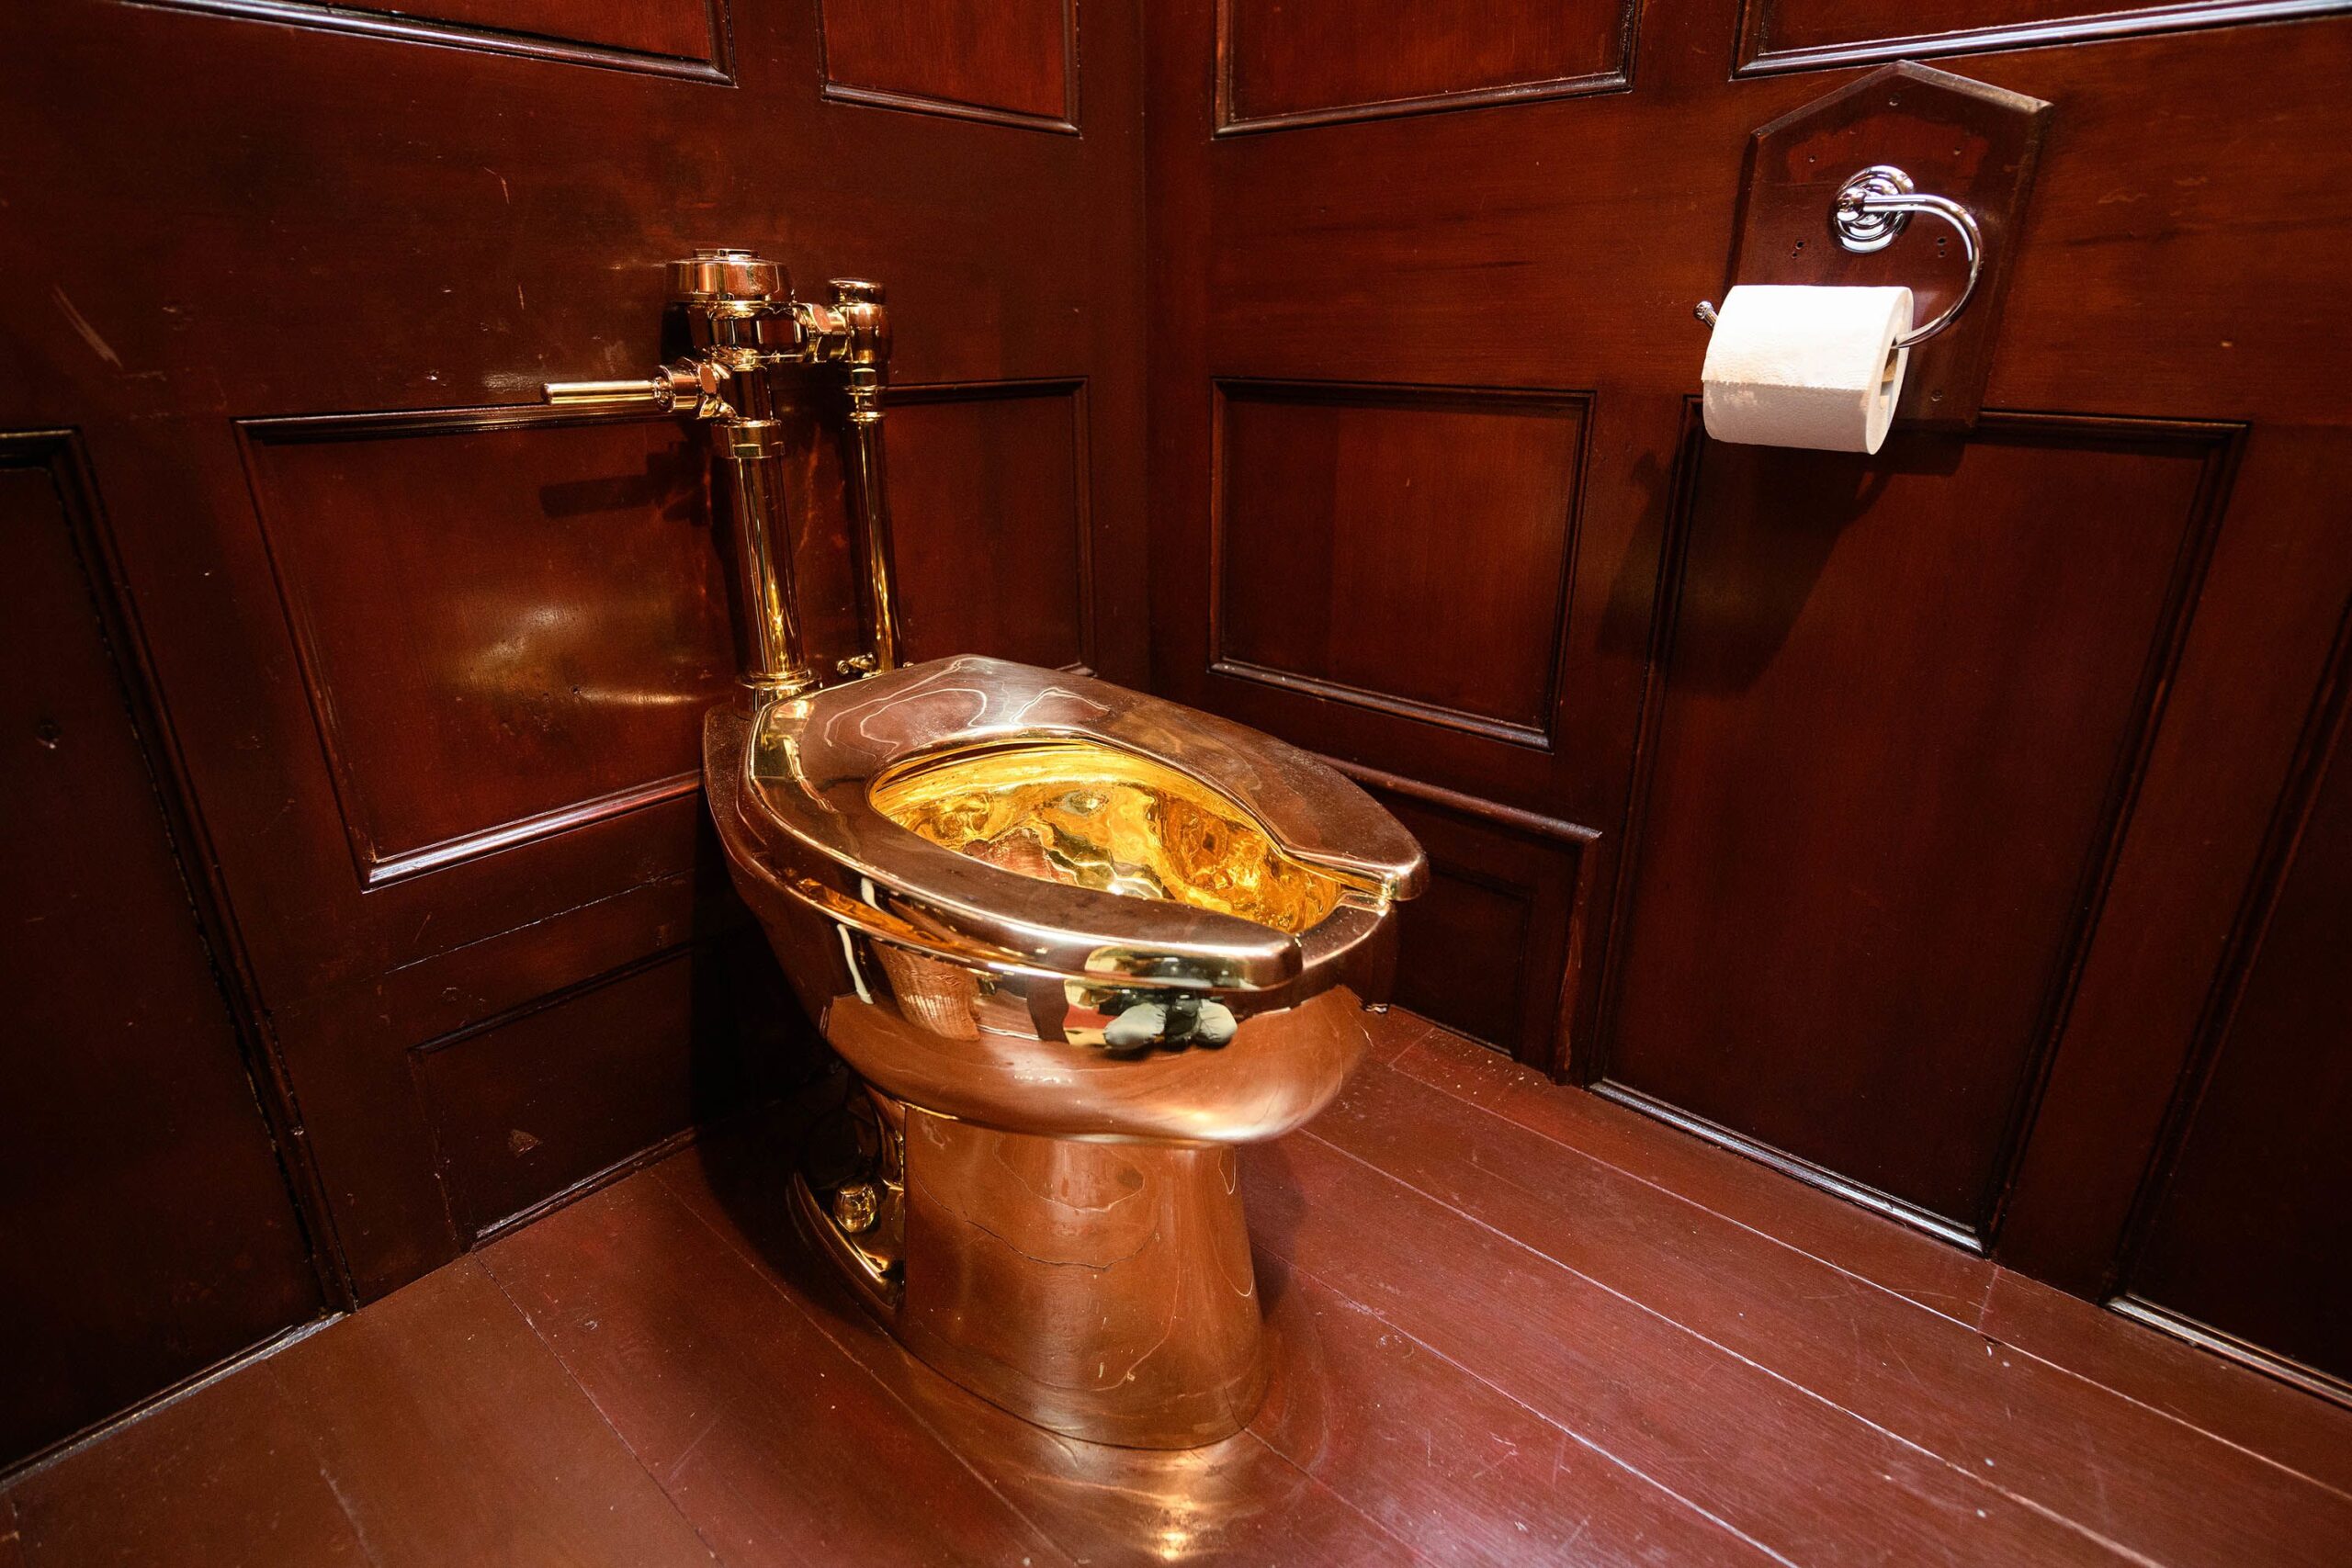 A man has pleaded guilty to stealing a fully-working solid gold toilet created by artist Maurizio C...